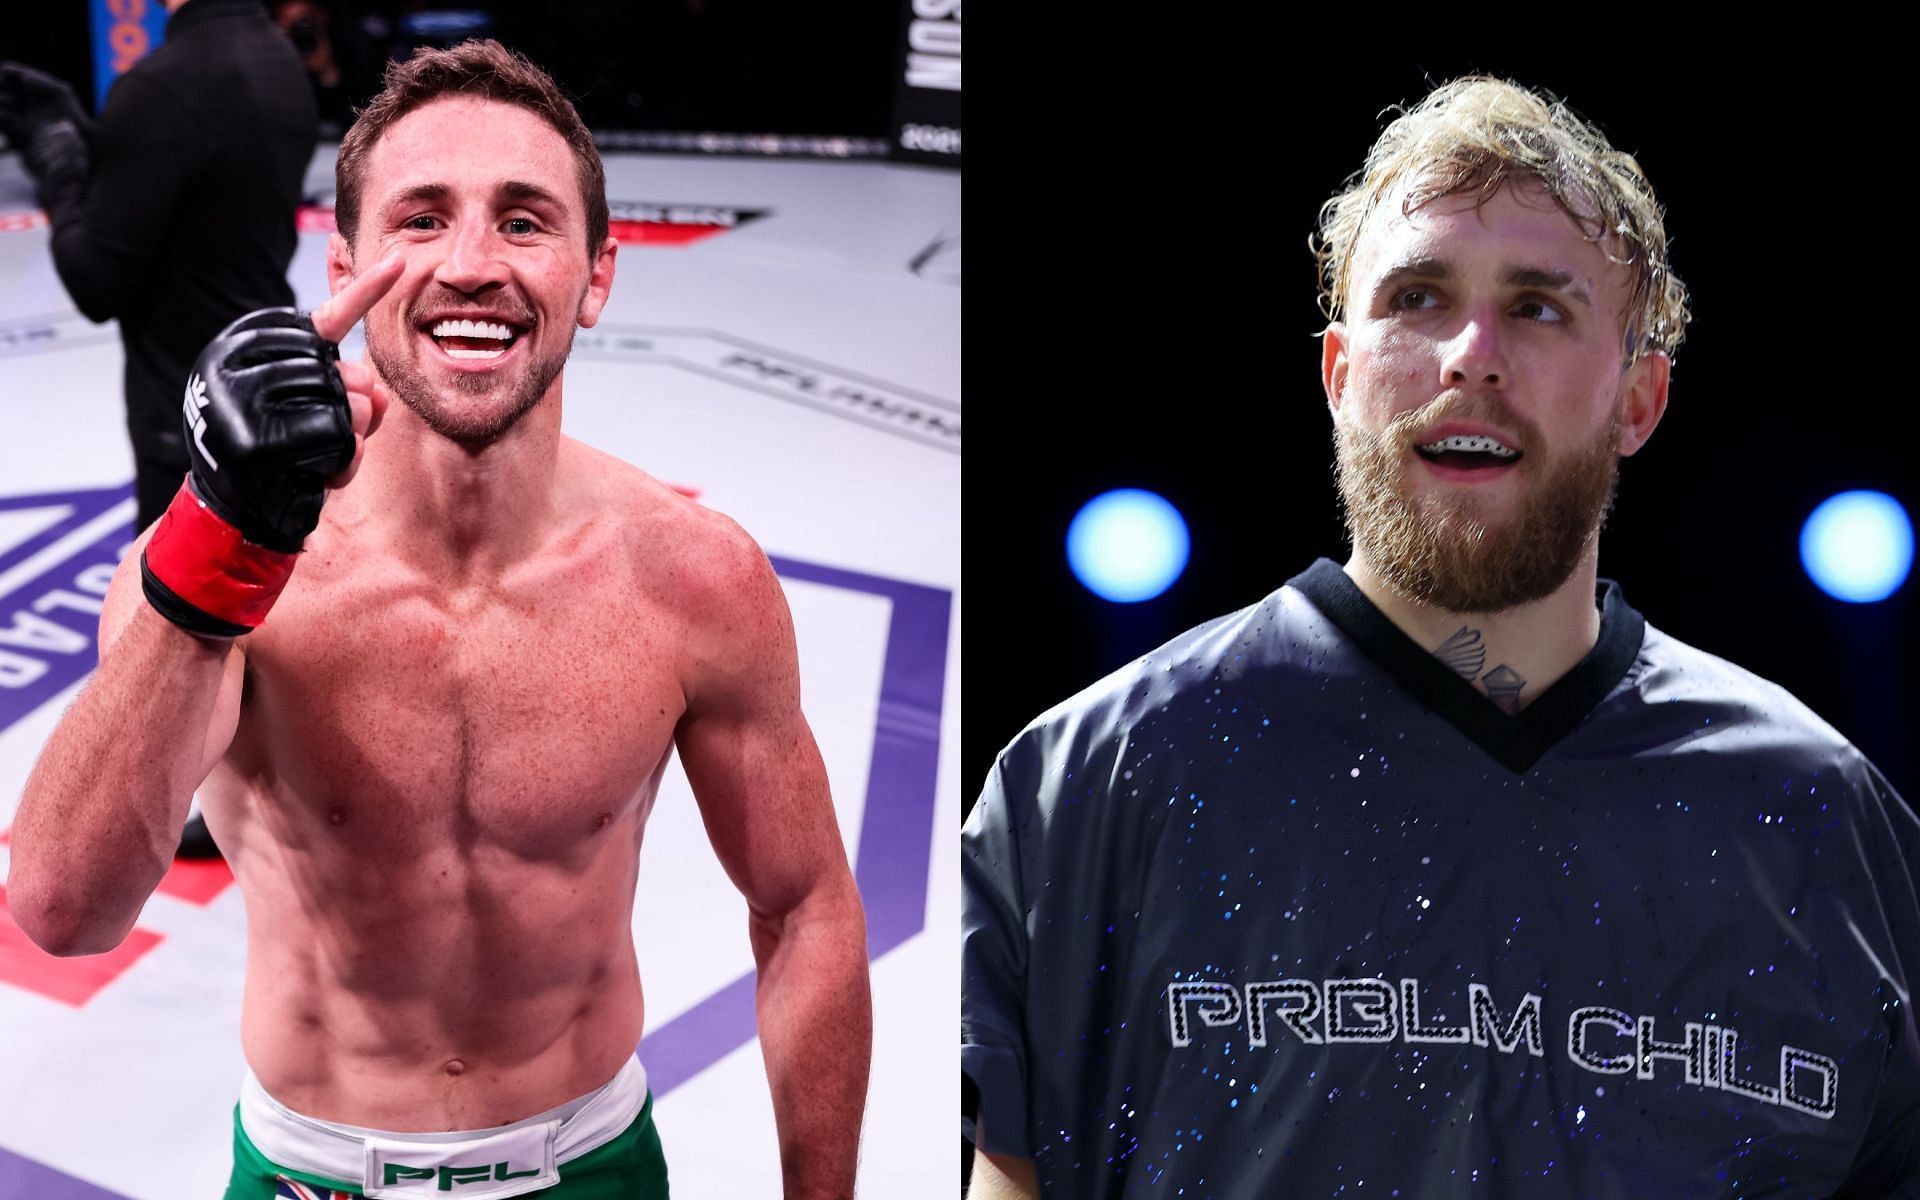 Brendan Loughnane (left) and Jake Paul (right) [Image credits: @MMAFighting on Twitter and Getty Images] 